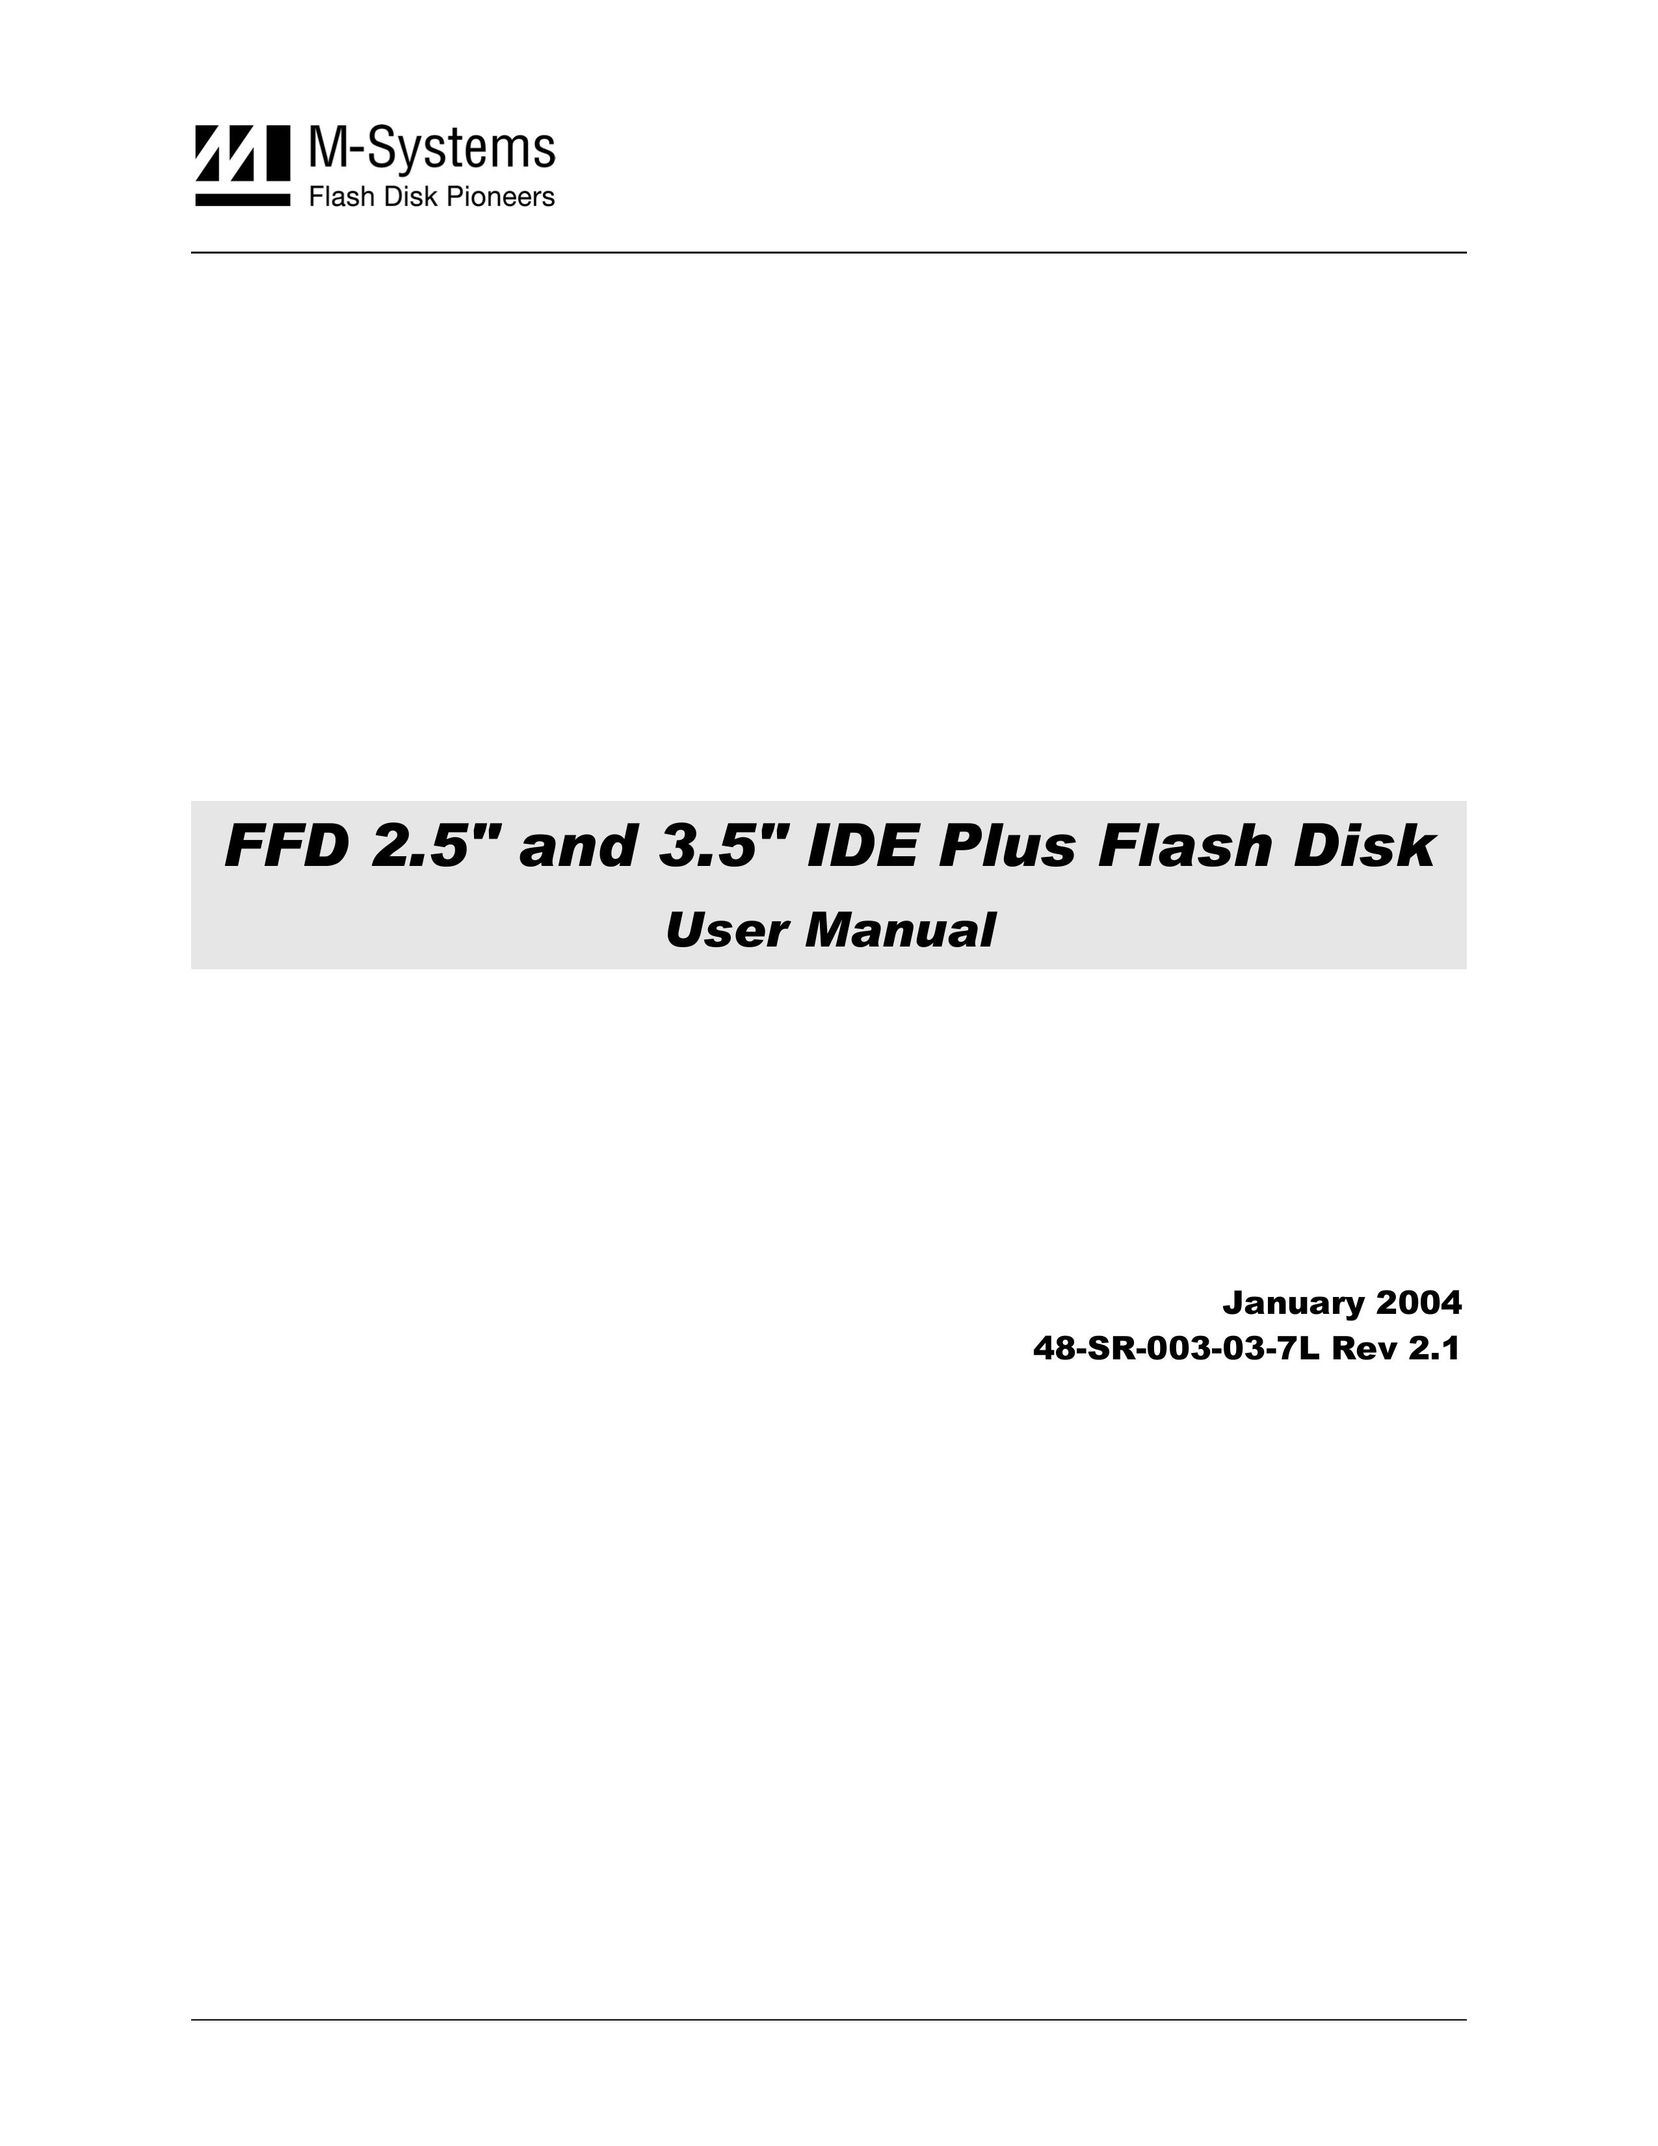 M-Systems Flash Disk Pioneers 48-SR-003-03-7L Computer Drive User Manual